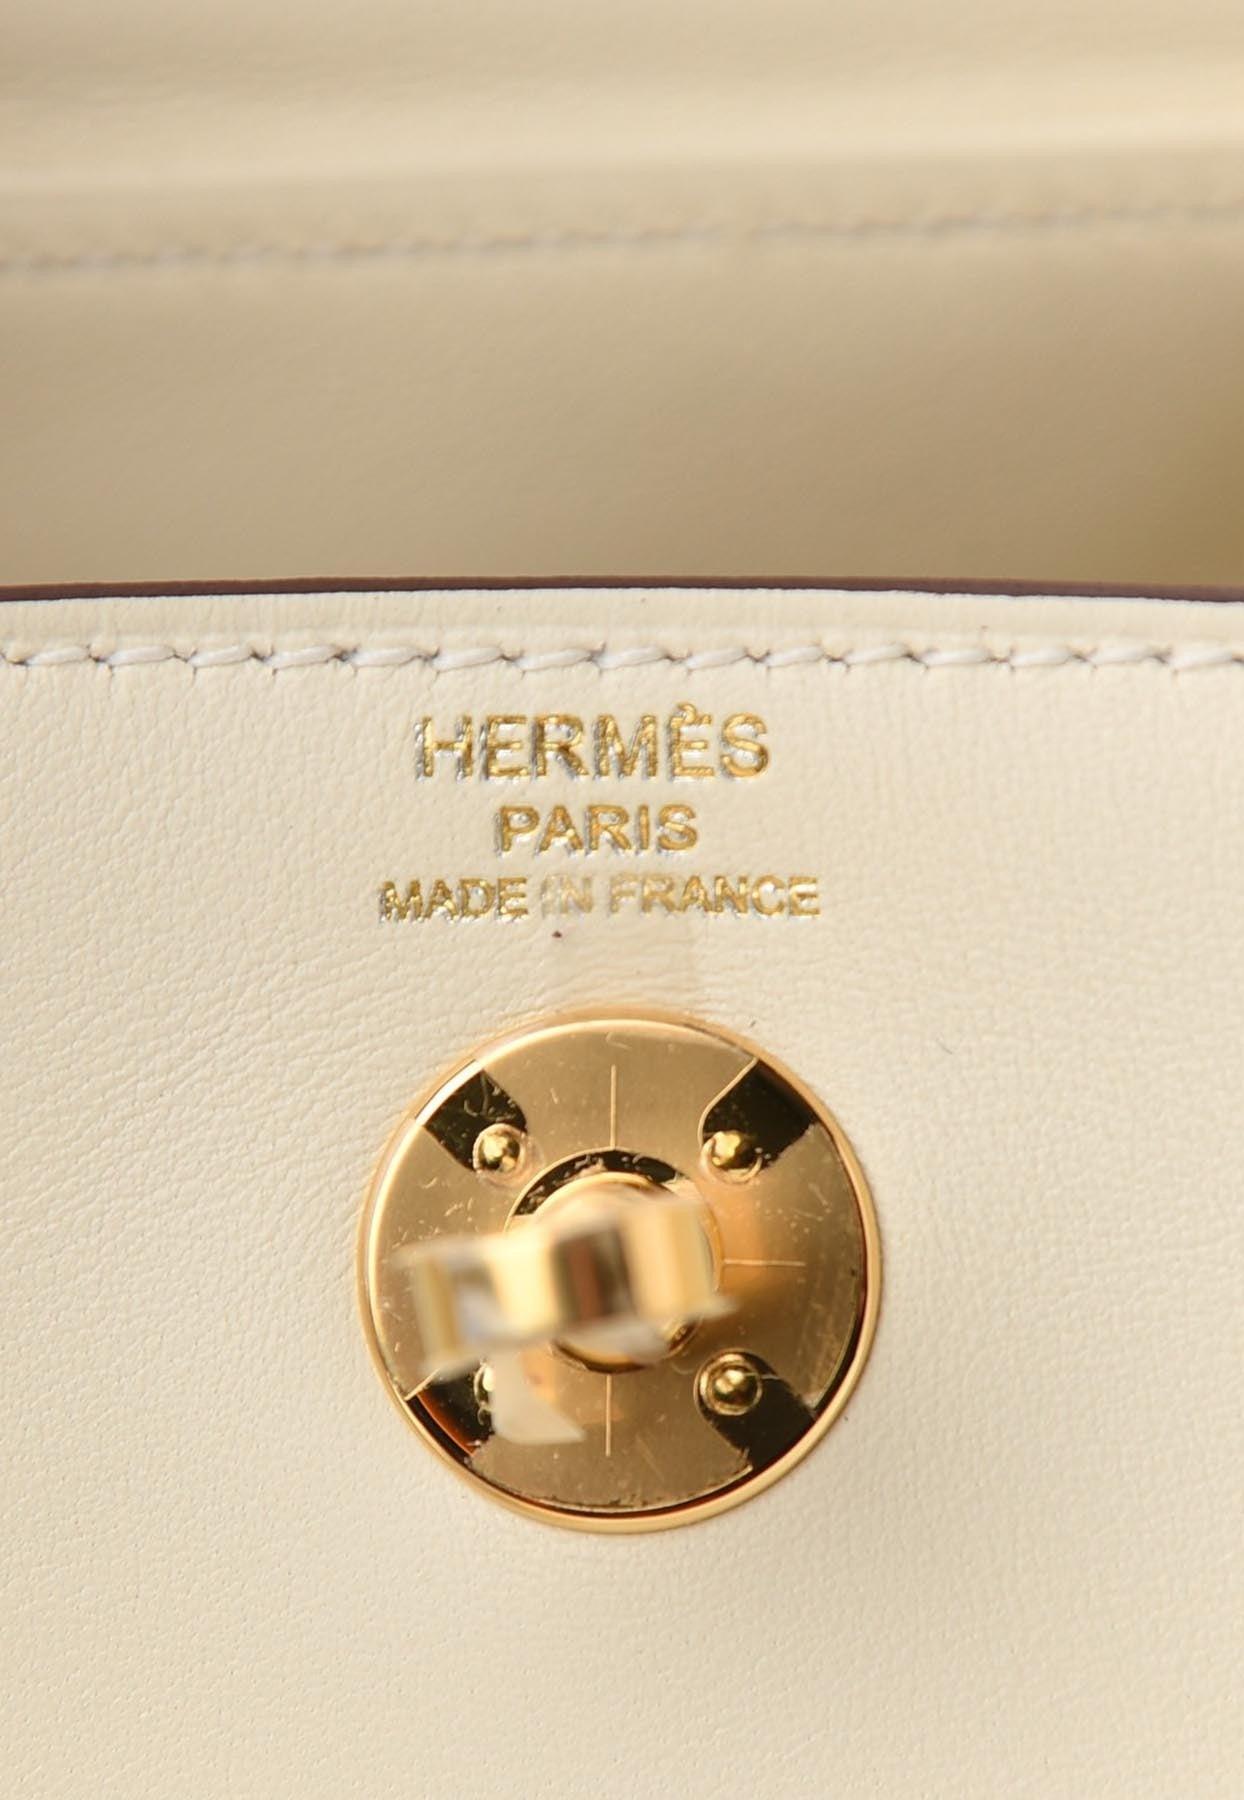 A GOLD SWIFT LEATHER MINI LINDY 19 WITH GOLD HARDWARE, HERMÈS, 2021